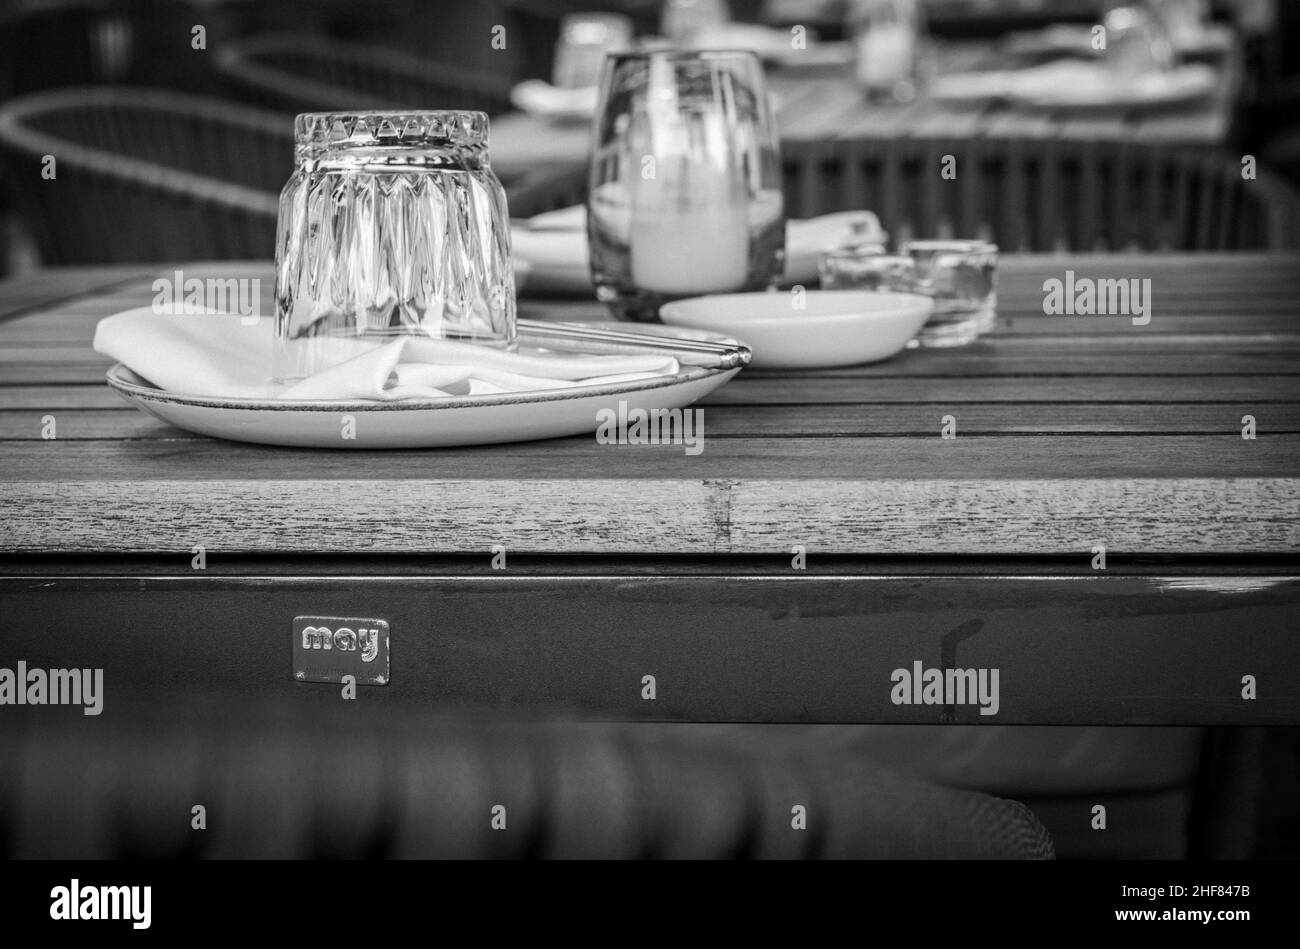 set table,  plate and glass Stock Photo